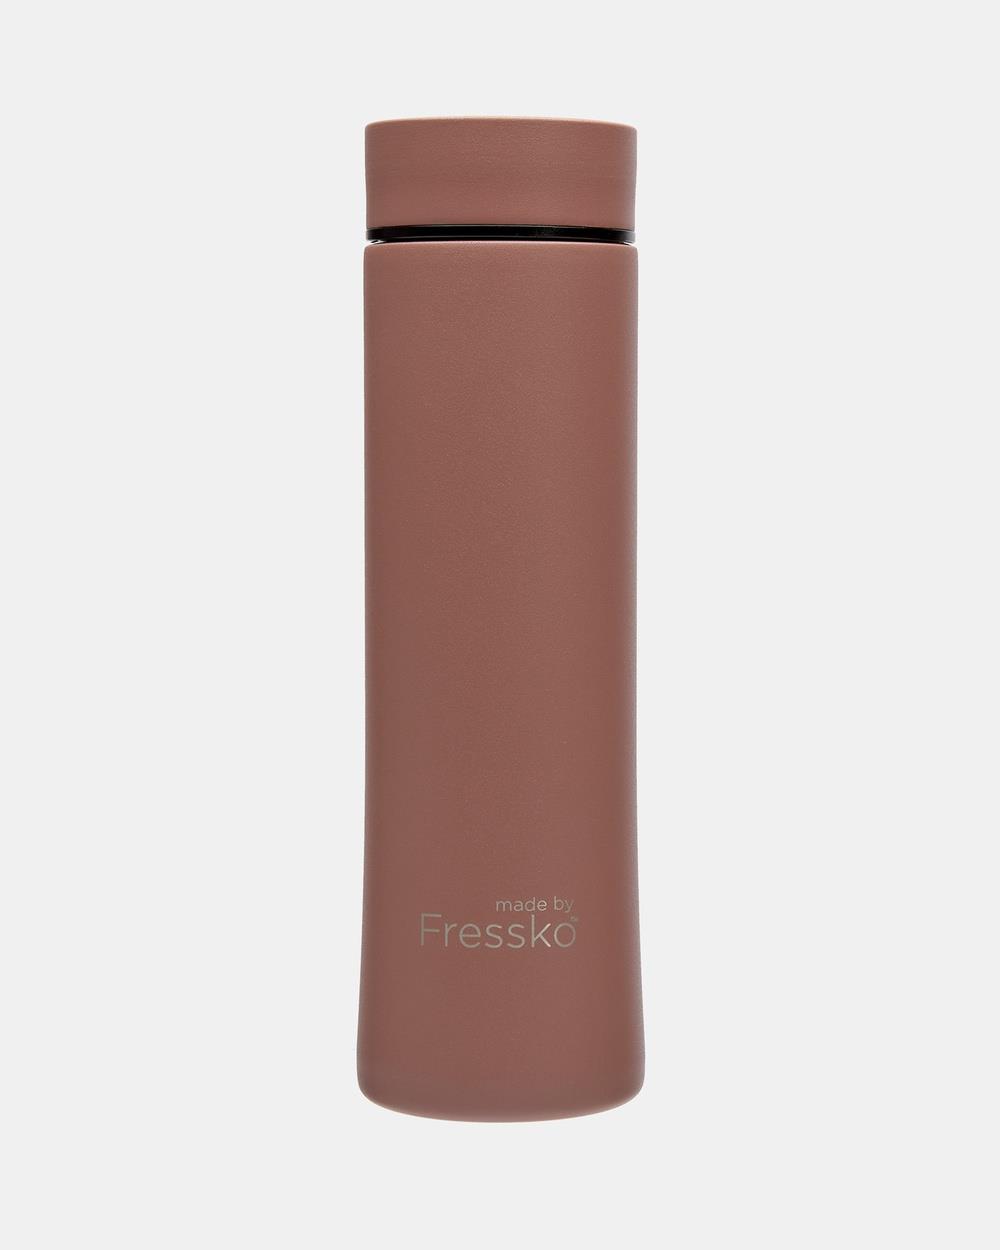 Fressko - MOVE 660ml Infuser Flask - Home (Red Brown) MOVE 660ml Infuser Flask